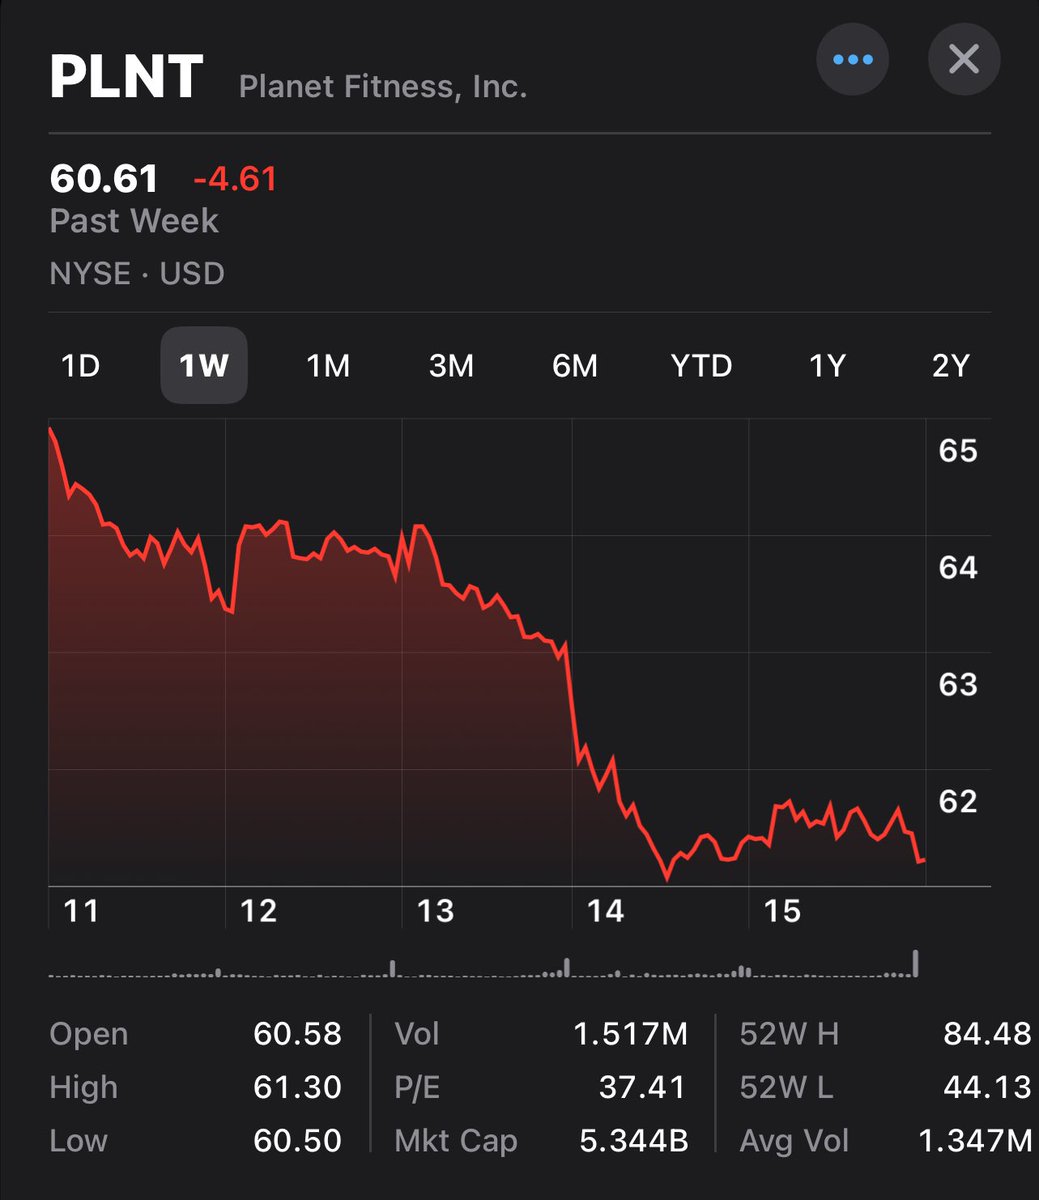 @libsoftiktok Planet Fitness stock has been tanking over the past week. Apparently, they want this to continue because they’re continuing to cancel women. As you can see they have a history of doing this. I guess Planet Fitness won’t be happy until their stock is worth nothing.